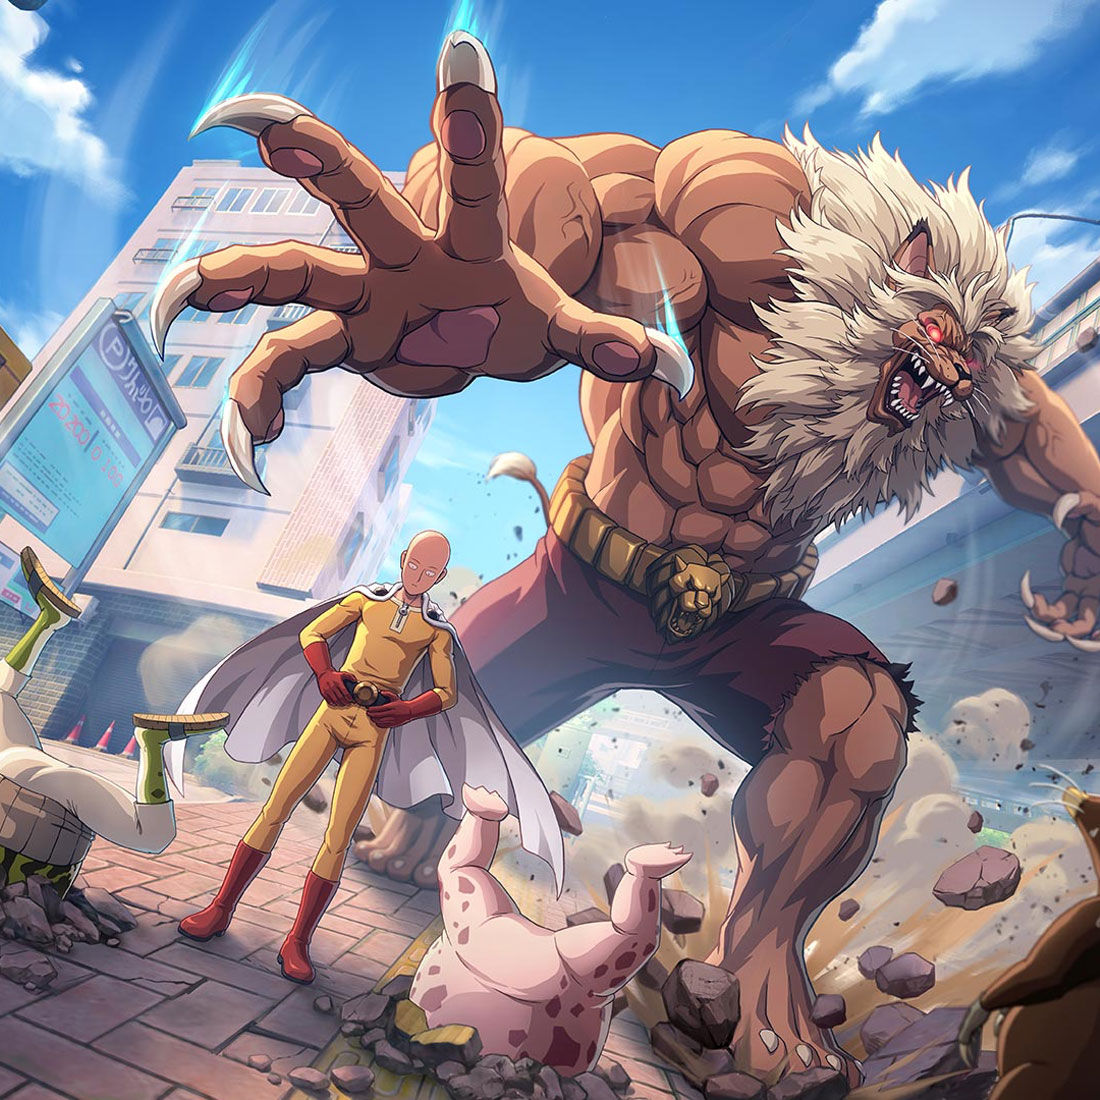 Crunchyroll announces One Punch Man Game for PC and Mobile